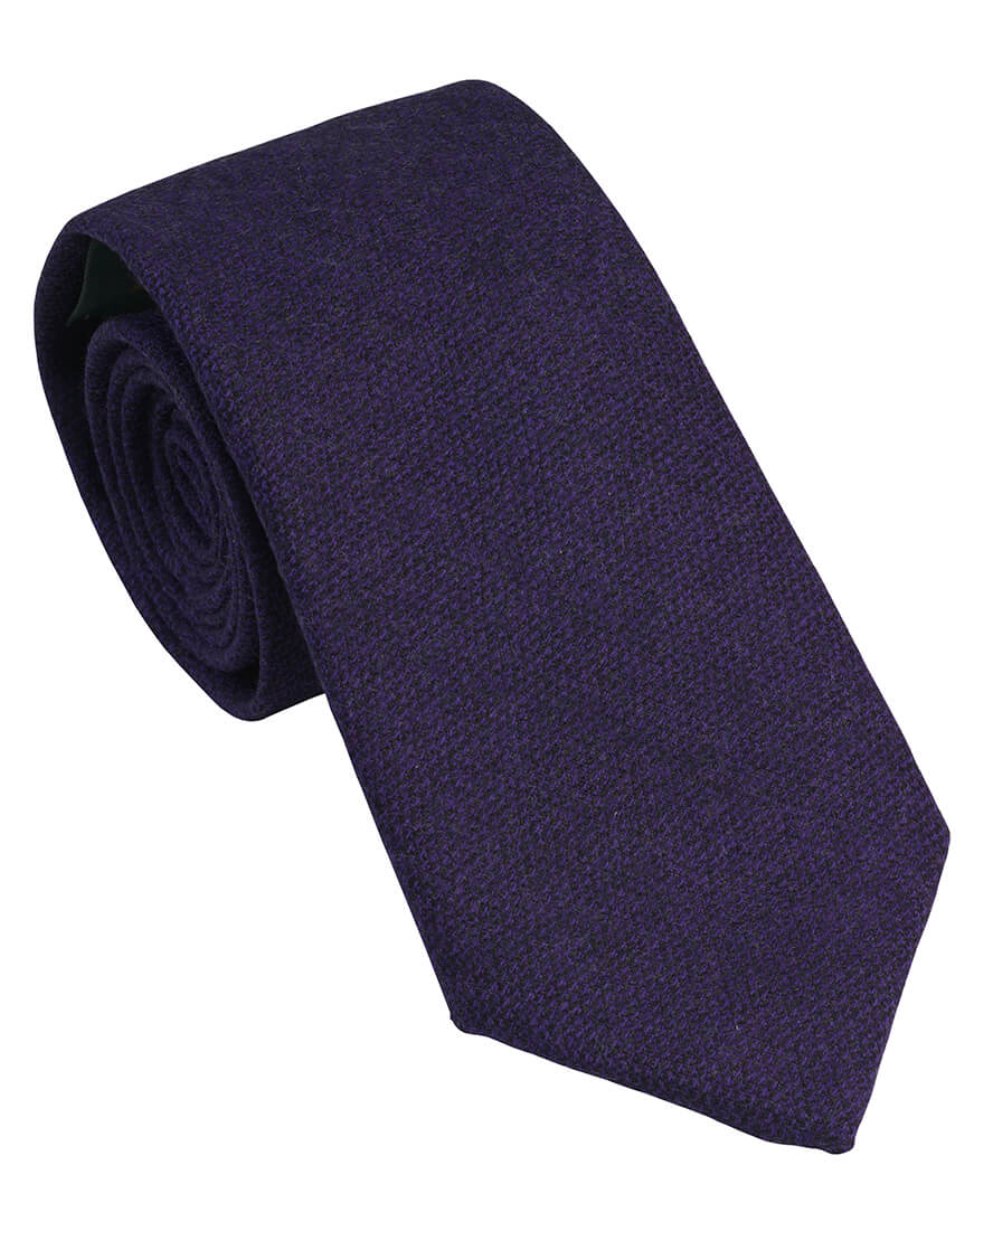 Purple Coloured Laksen Celtic Tweed Tie On A White Background 